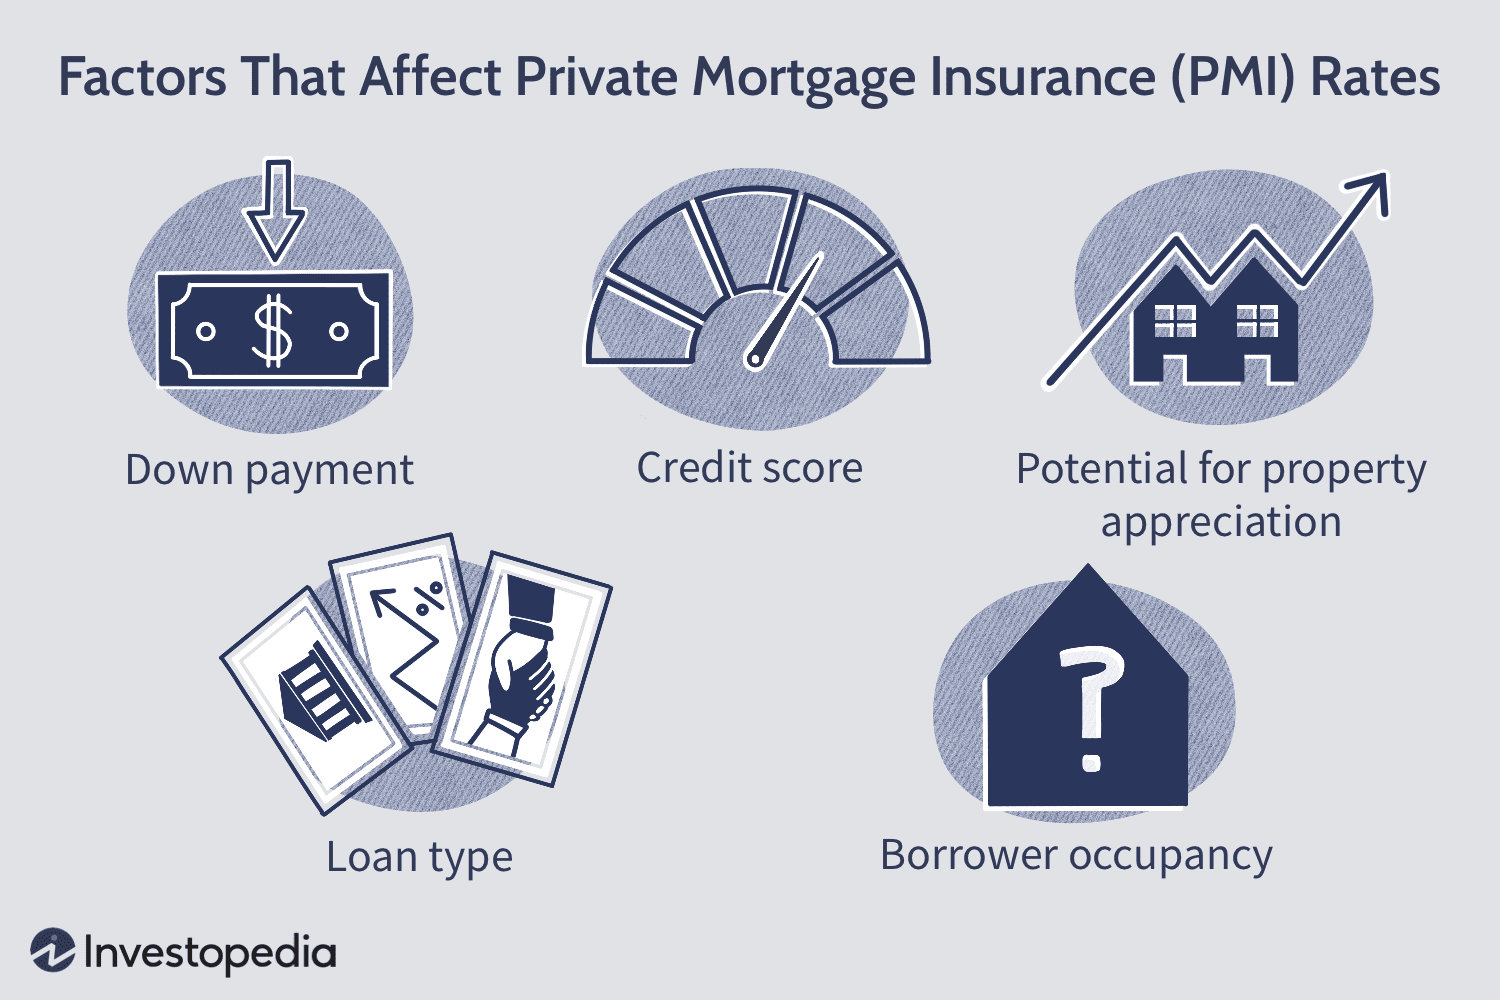 Should I Consider Private Mortgage Insurance (PMI) If My Down Payment Is Less Than 20%?